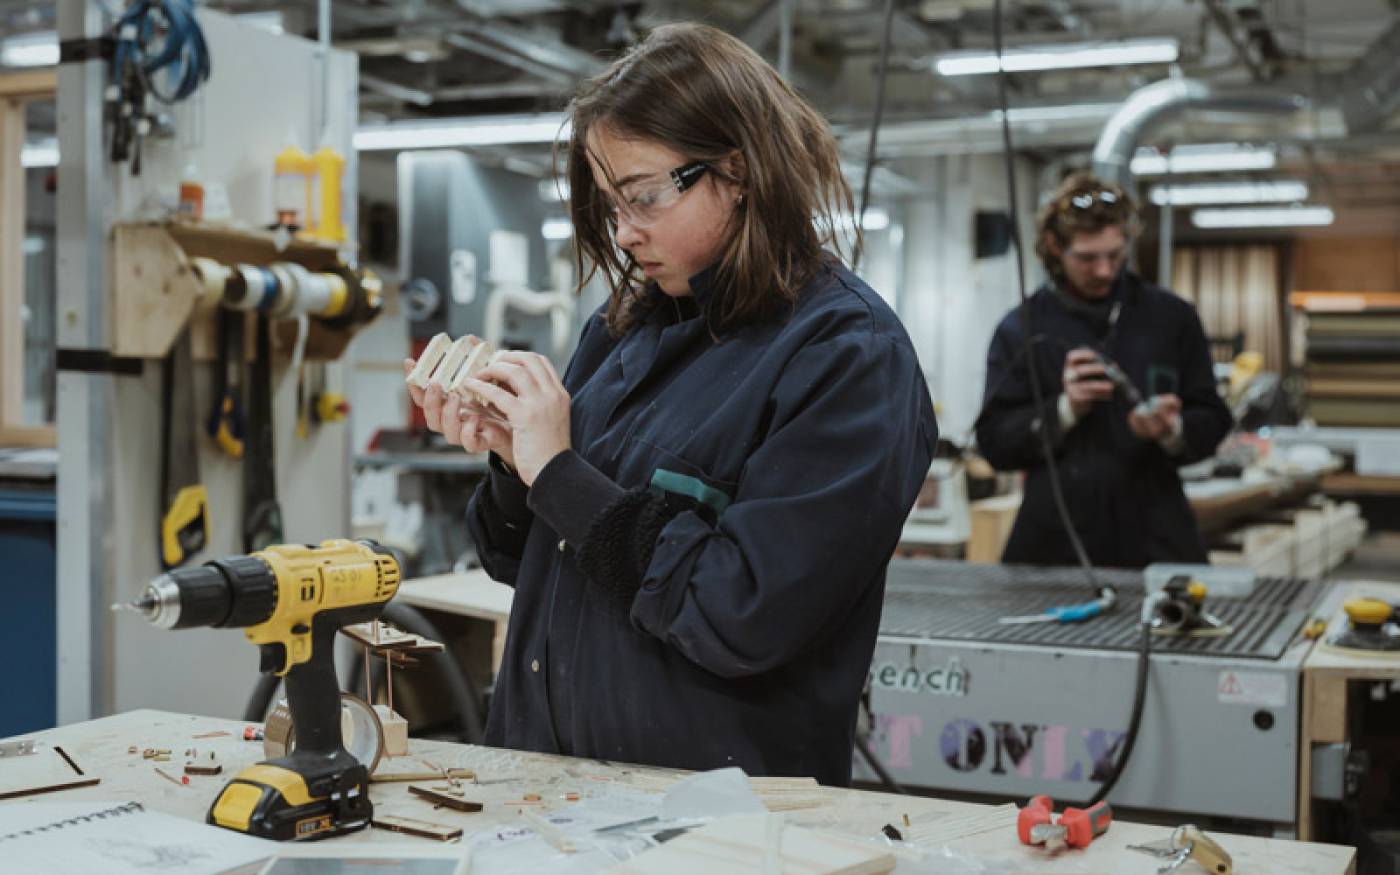 A female student creating a model in the Bartlett workshop, with drills and machinery around her, and a male student working in the background